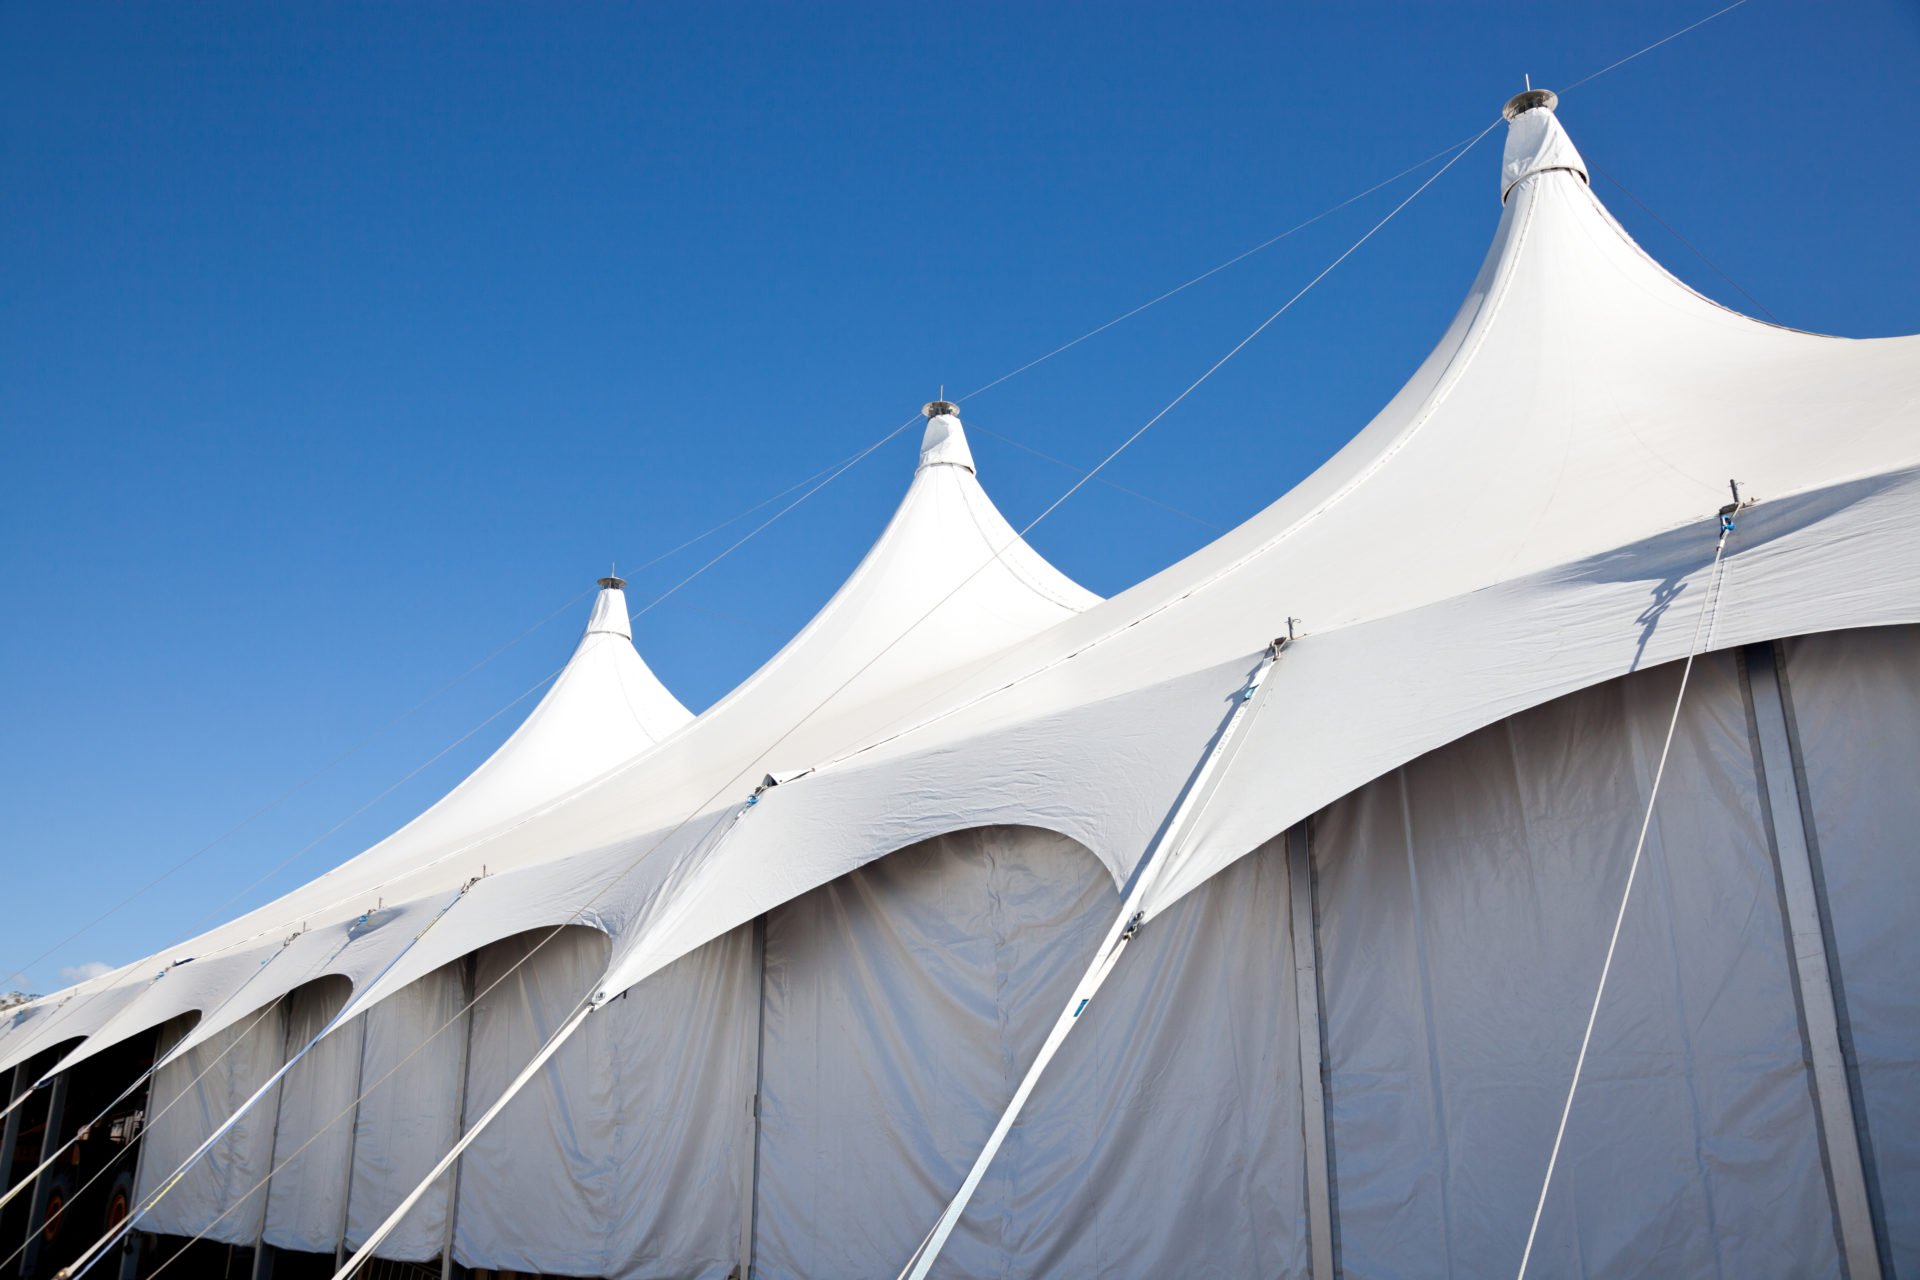 Ready to hire a Marquee?